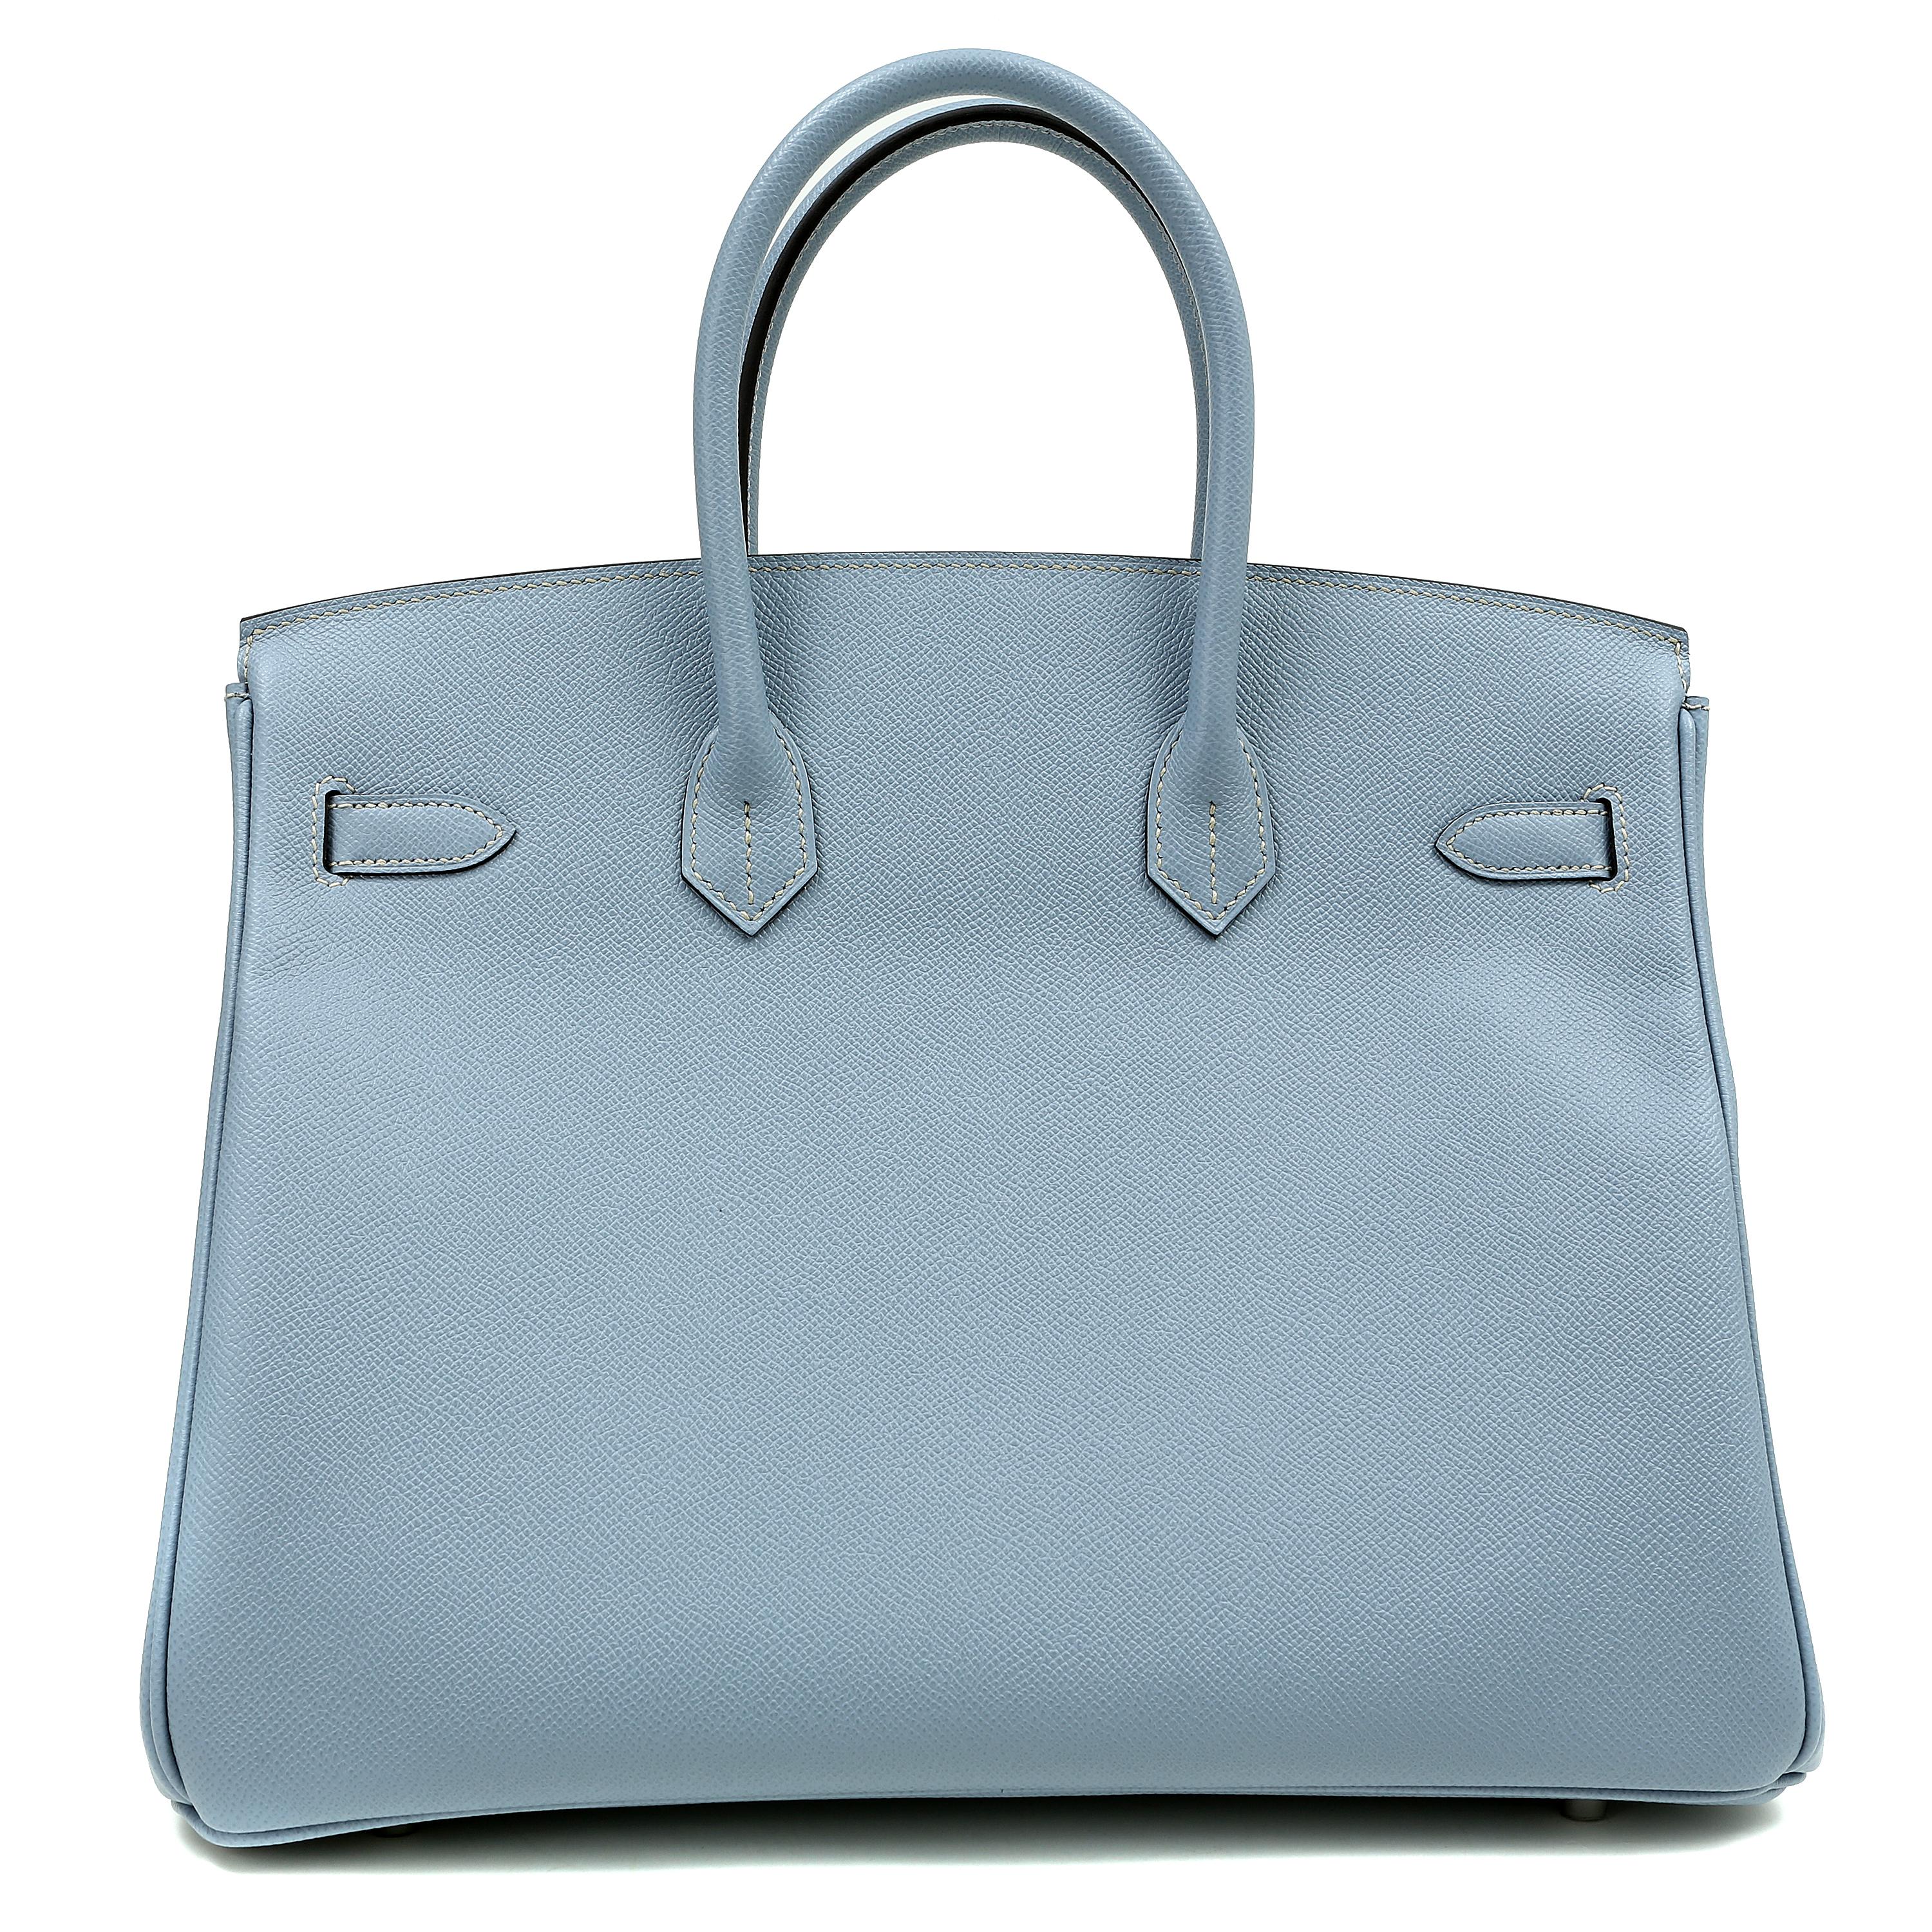 This authentic Hermès Bleu Lin Epsom 35 cm Birkin is in pristine unworn condition; the protective plastic is still intact on the hardware.    Considered the ultimate luxury item, the Hermès Birkin is stitched by hand. Waitlists are commonplace.  